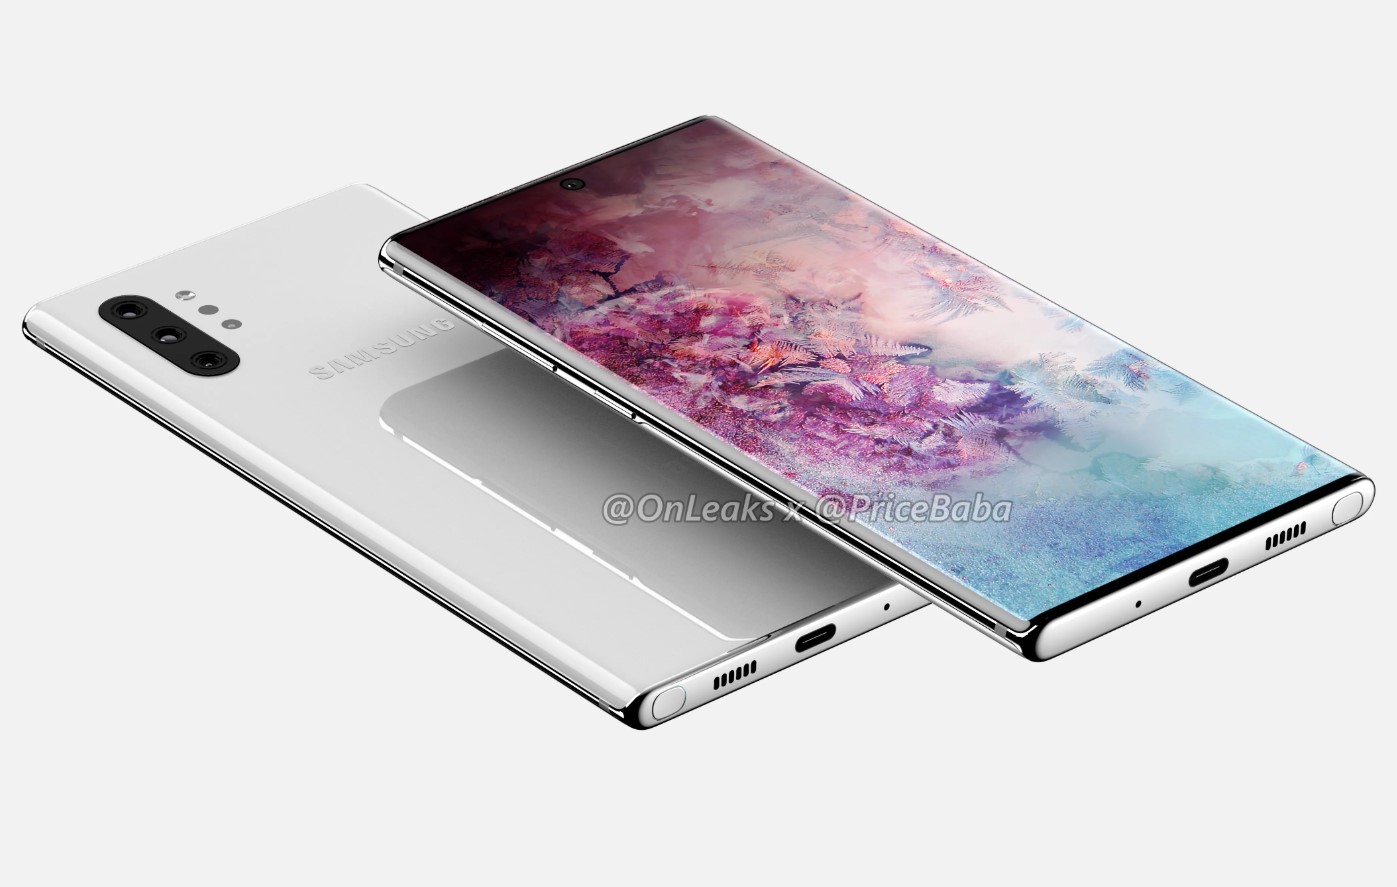 Samsung Galaxy Note 10 Pro case leaked online